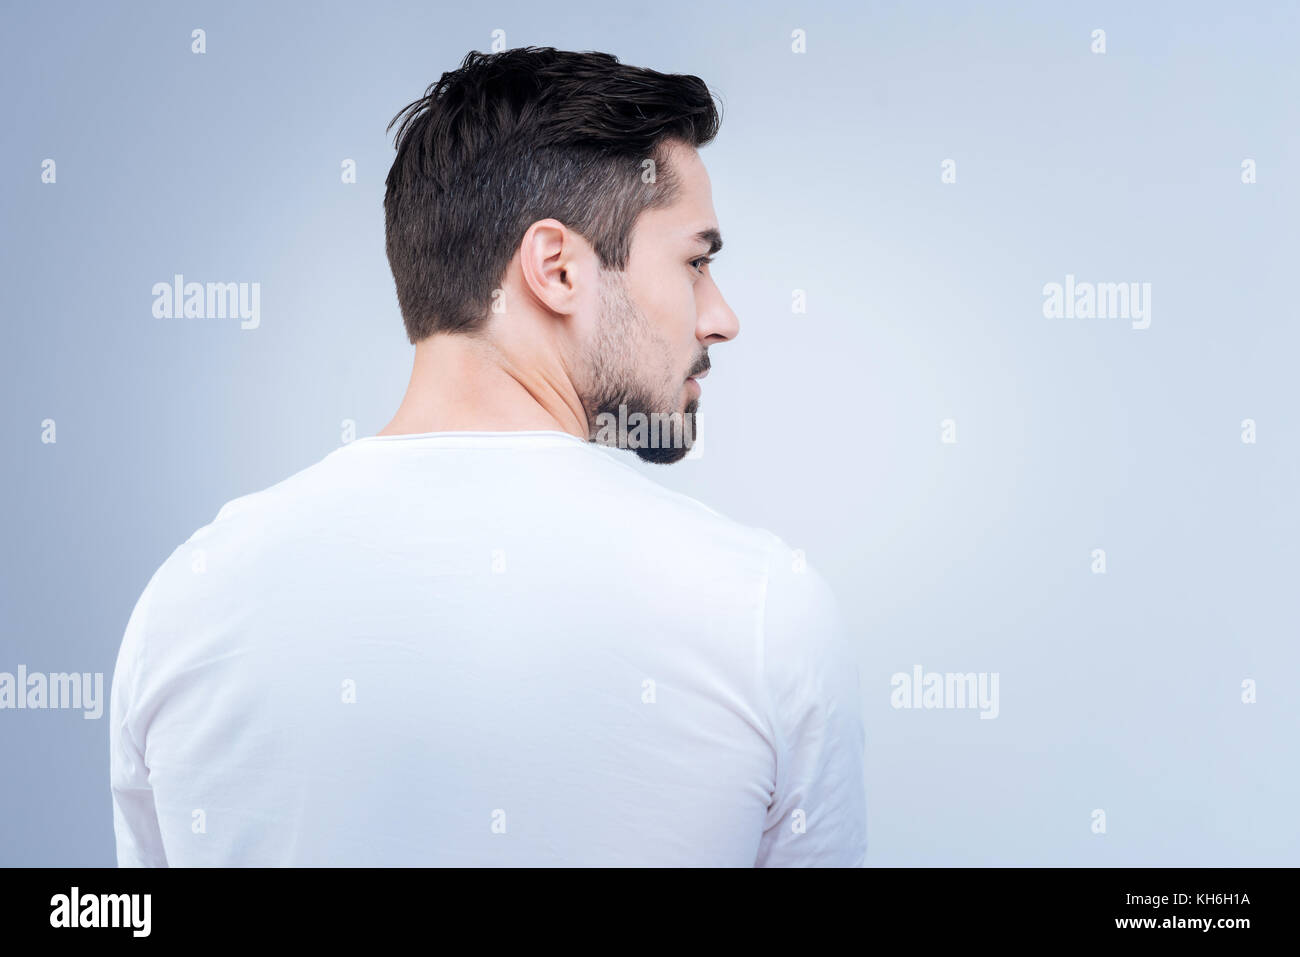 Serious bearded man looking to the right while turning away Stock Photo